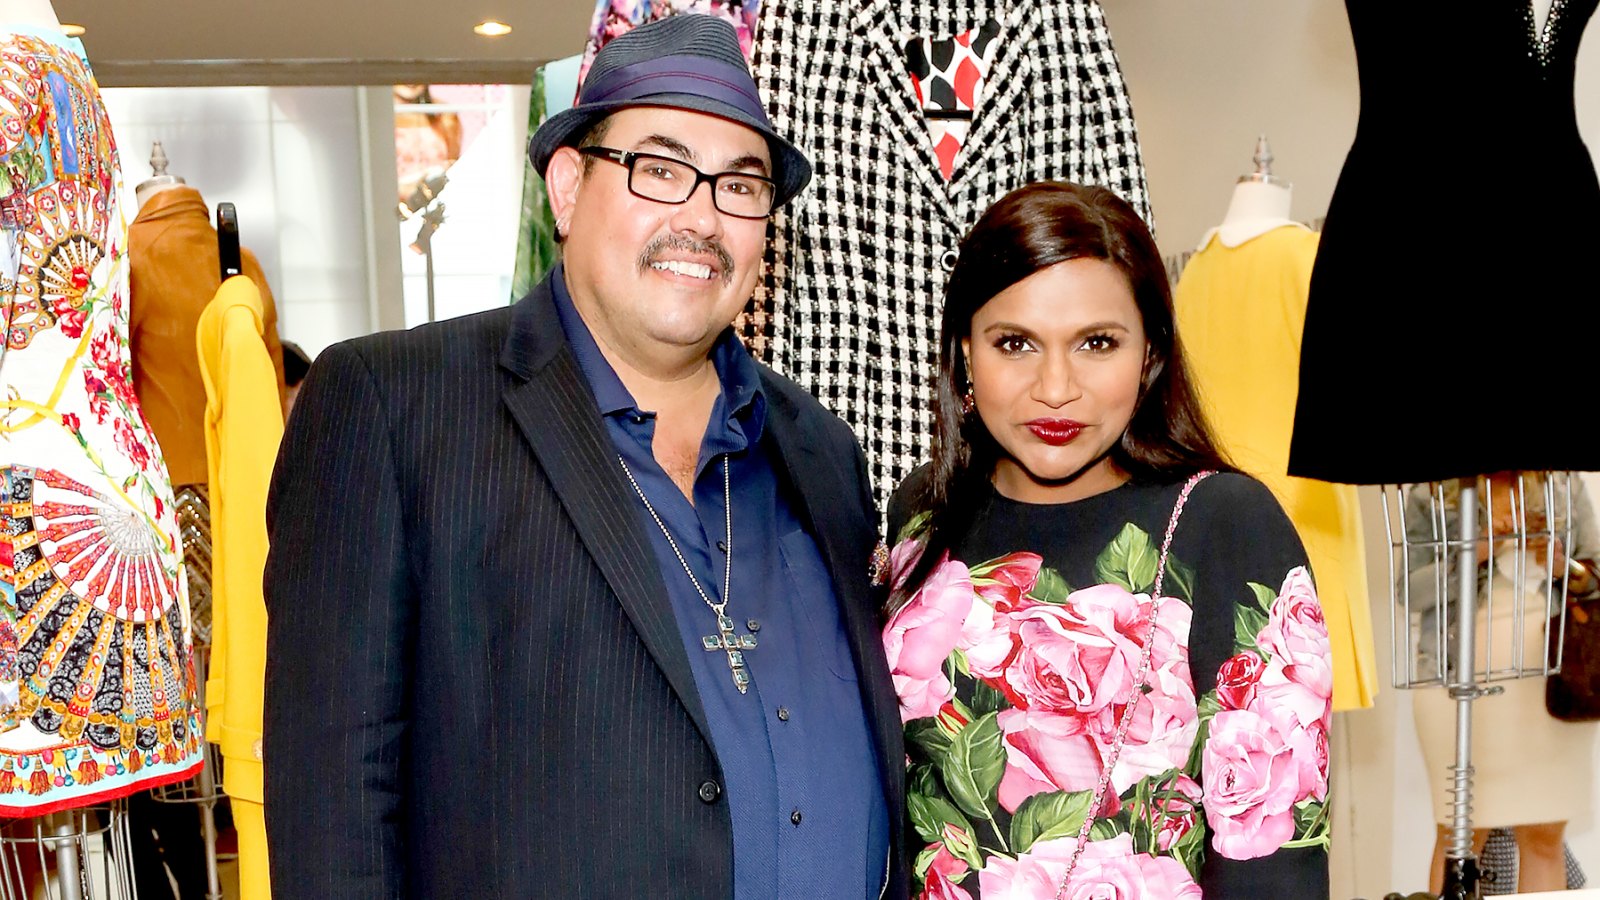 Costume Designer Sal Perez (L) and Actress Mindy Kaling attend the "The Mindy Project": 6 Seasons Of Style at The Paley Center for Media on August 24, 2017 in Beverly Hills, California.